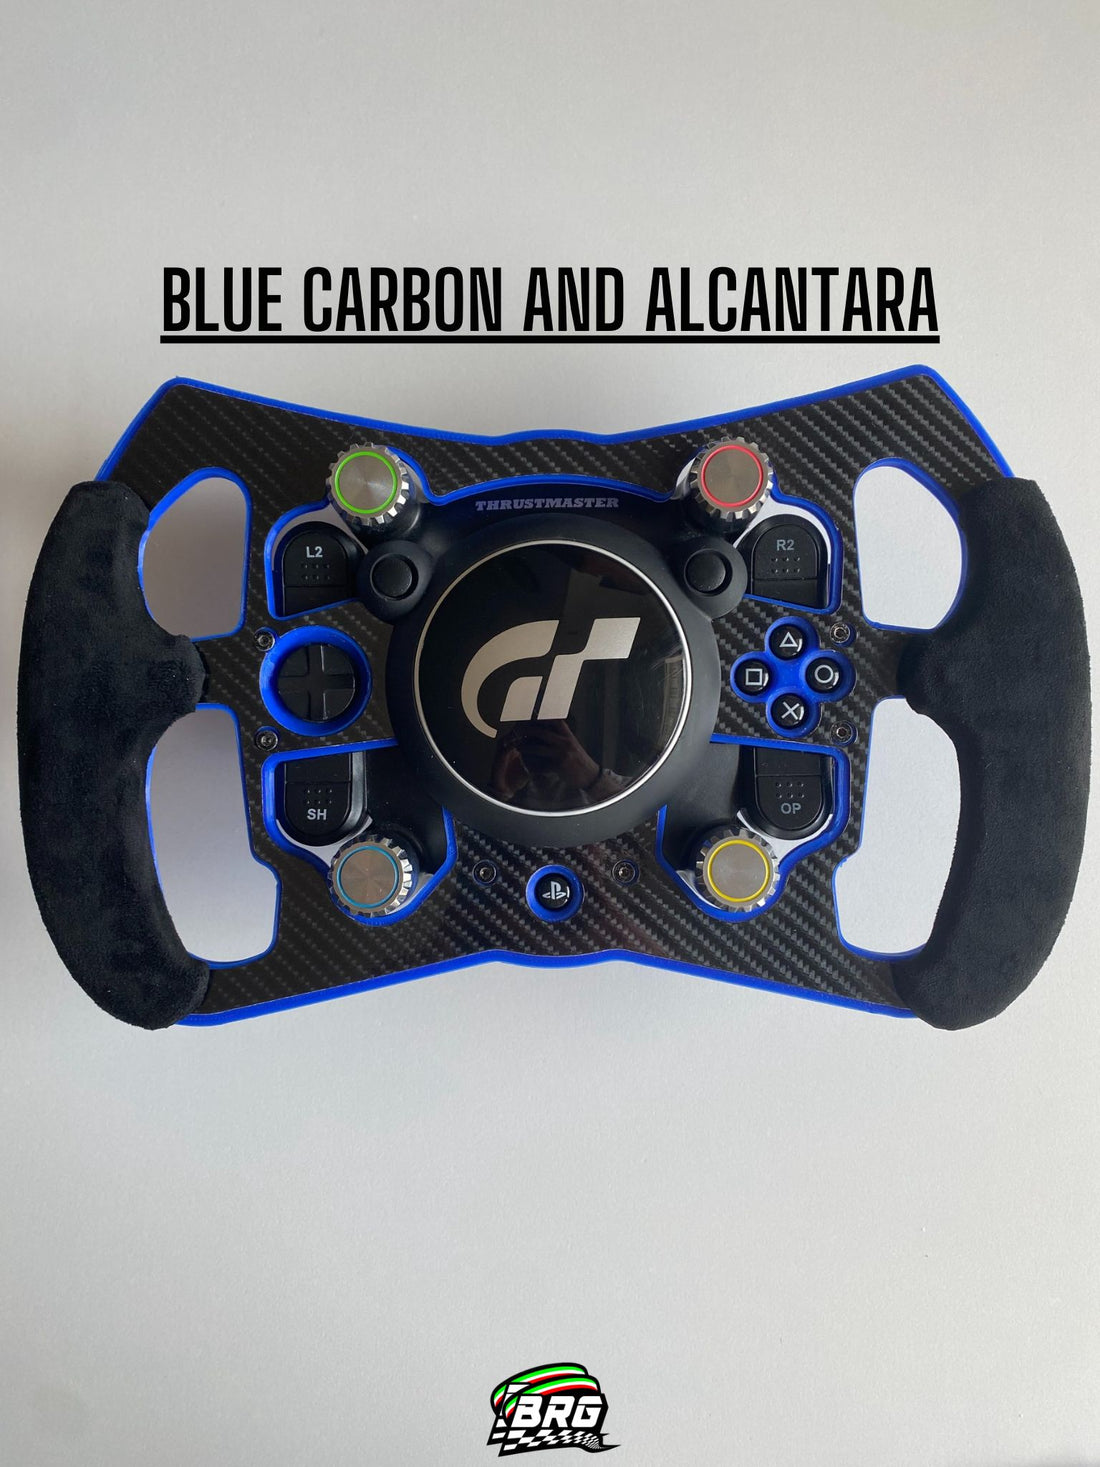 Open Wheel Mod for Thrustmaster T-GT. With Alcantara & 10+colors